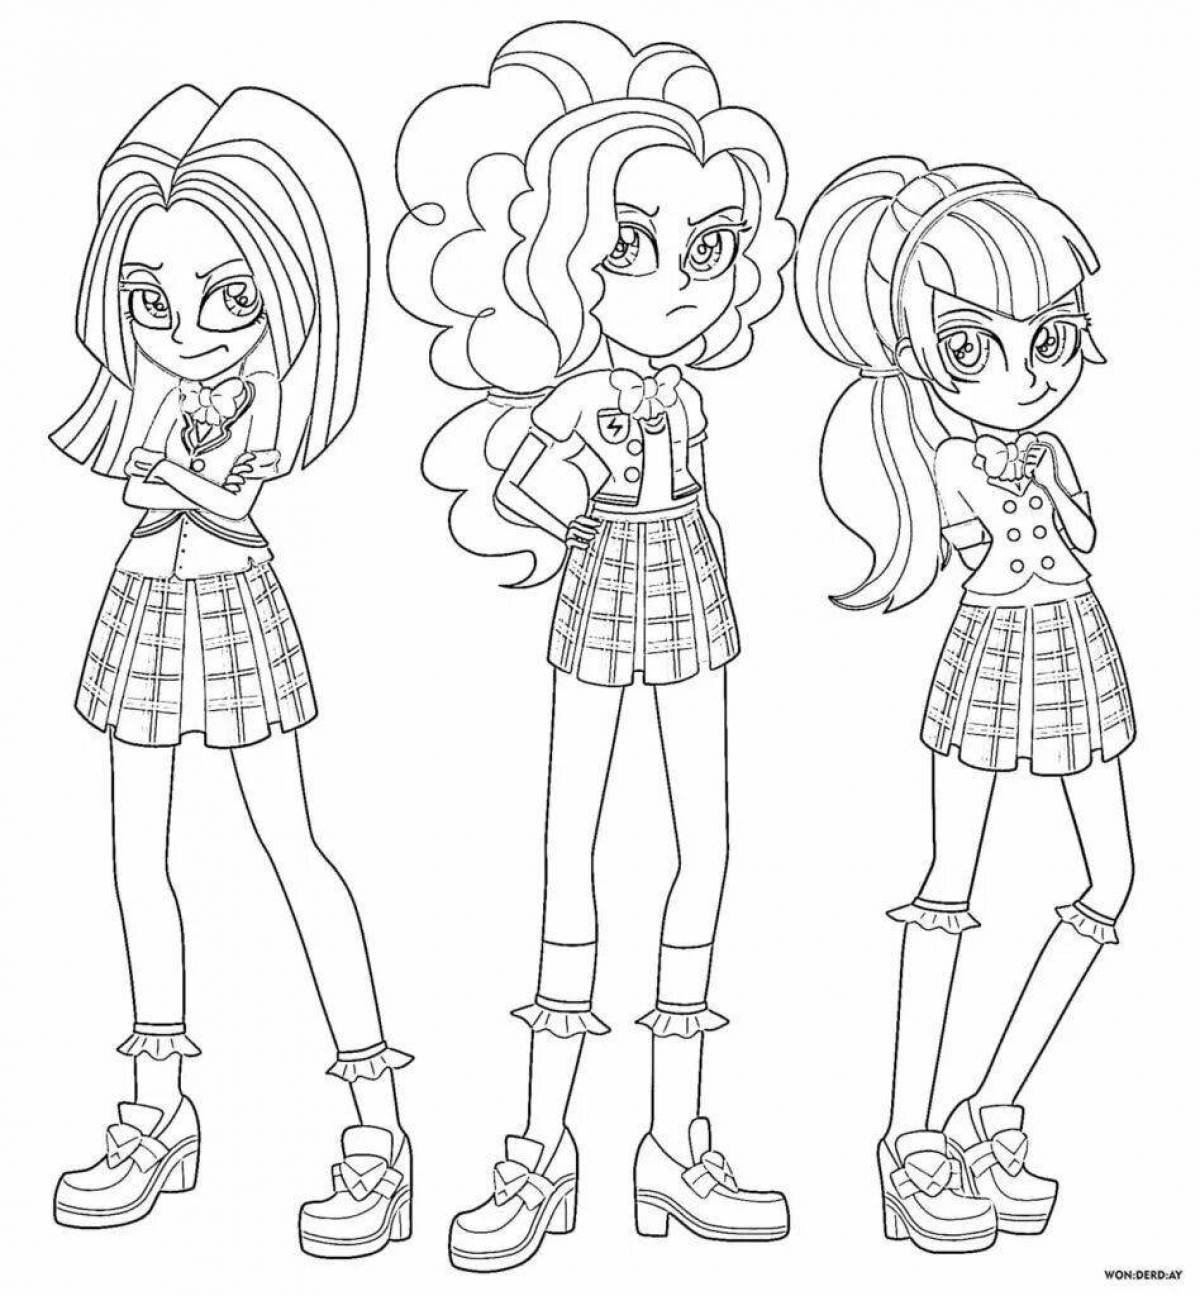 Rough Equestria Girls Pinkie Pie Coloring Page